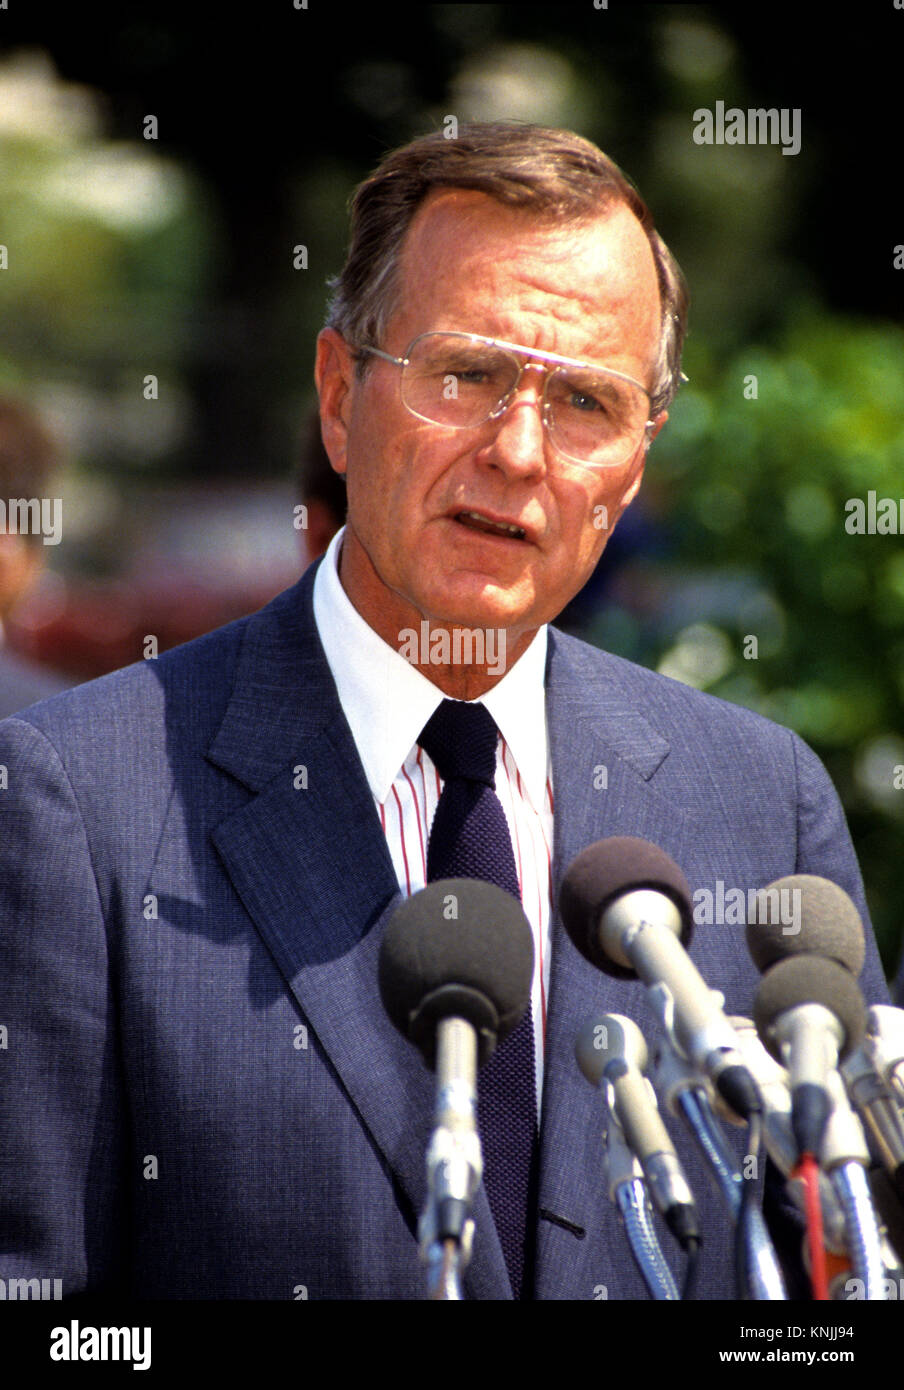 Washington, District of Columbia, USA. 4th Aug, 1987. United States Vice President George H.W. Bush makes a statement favoring the use of Ethanol and Methanol fuels in cars at the US Capitol in Washington, DC on August 4, 1987.Credit: Ron Sachs/CNP Credit: Ron Sachs/CNP/ZUMA Wire/Alamy Live News Stock Photo